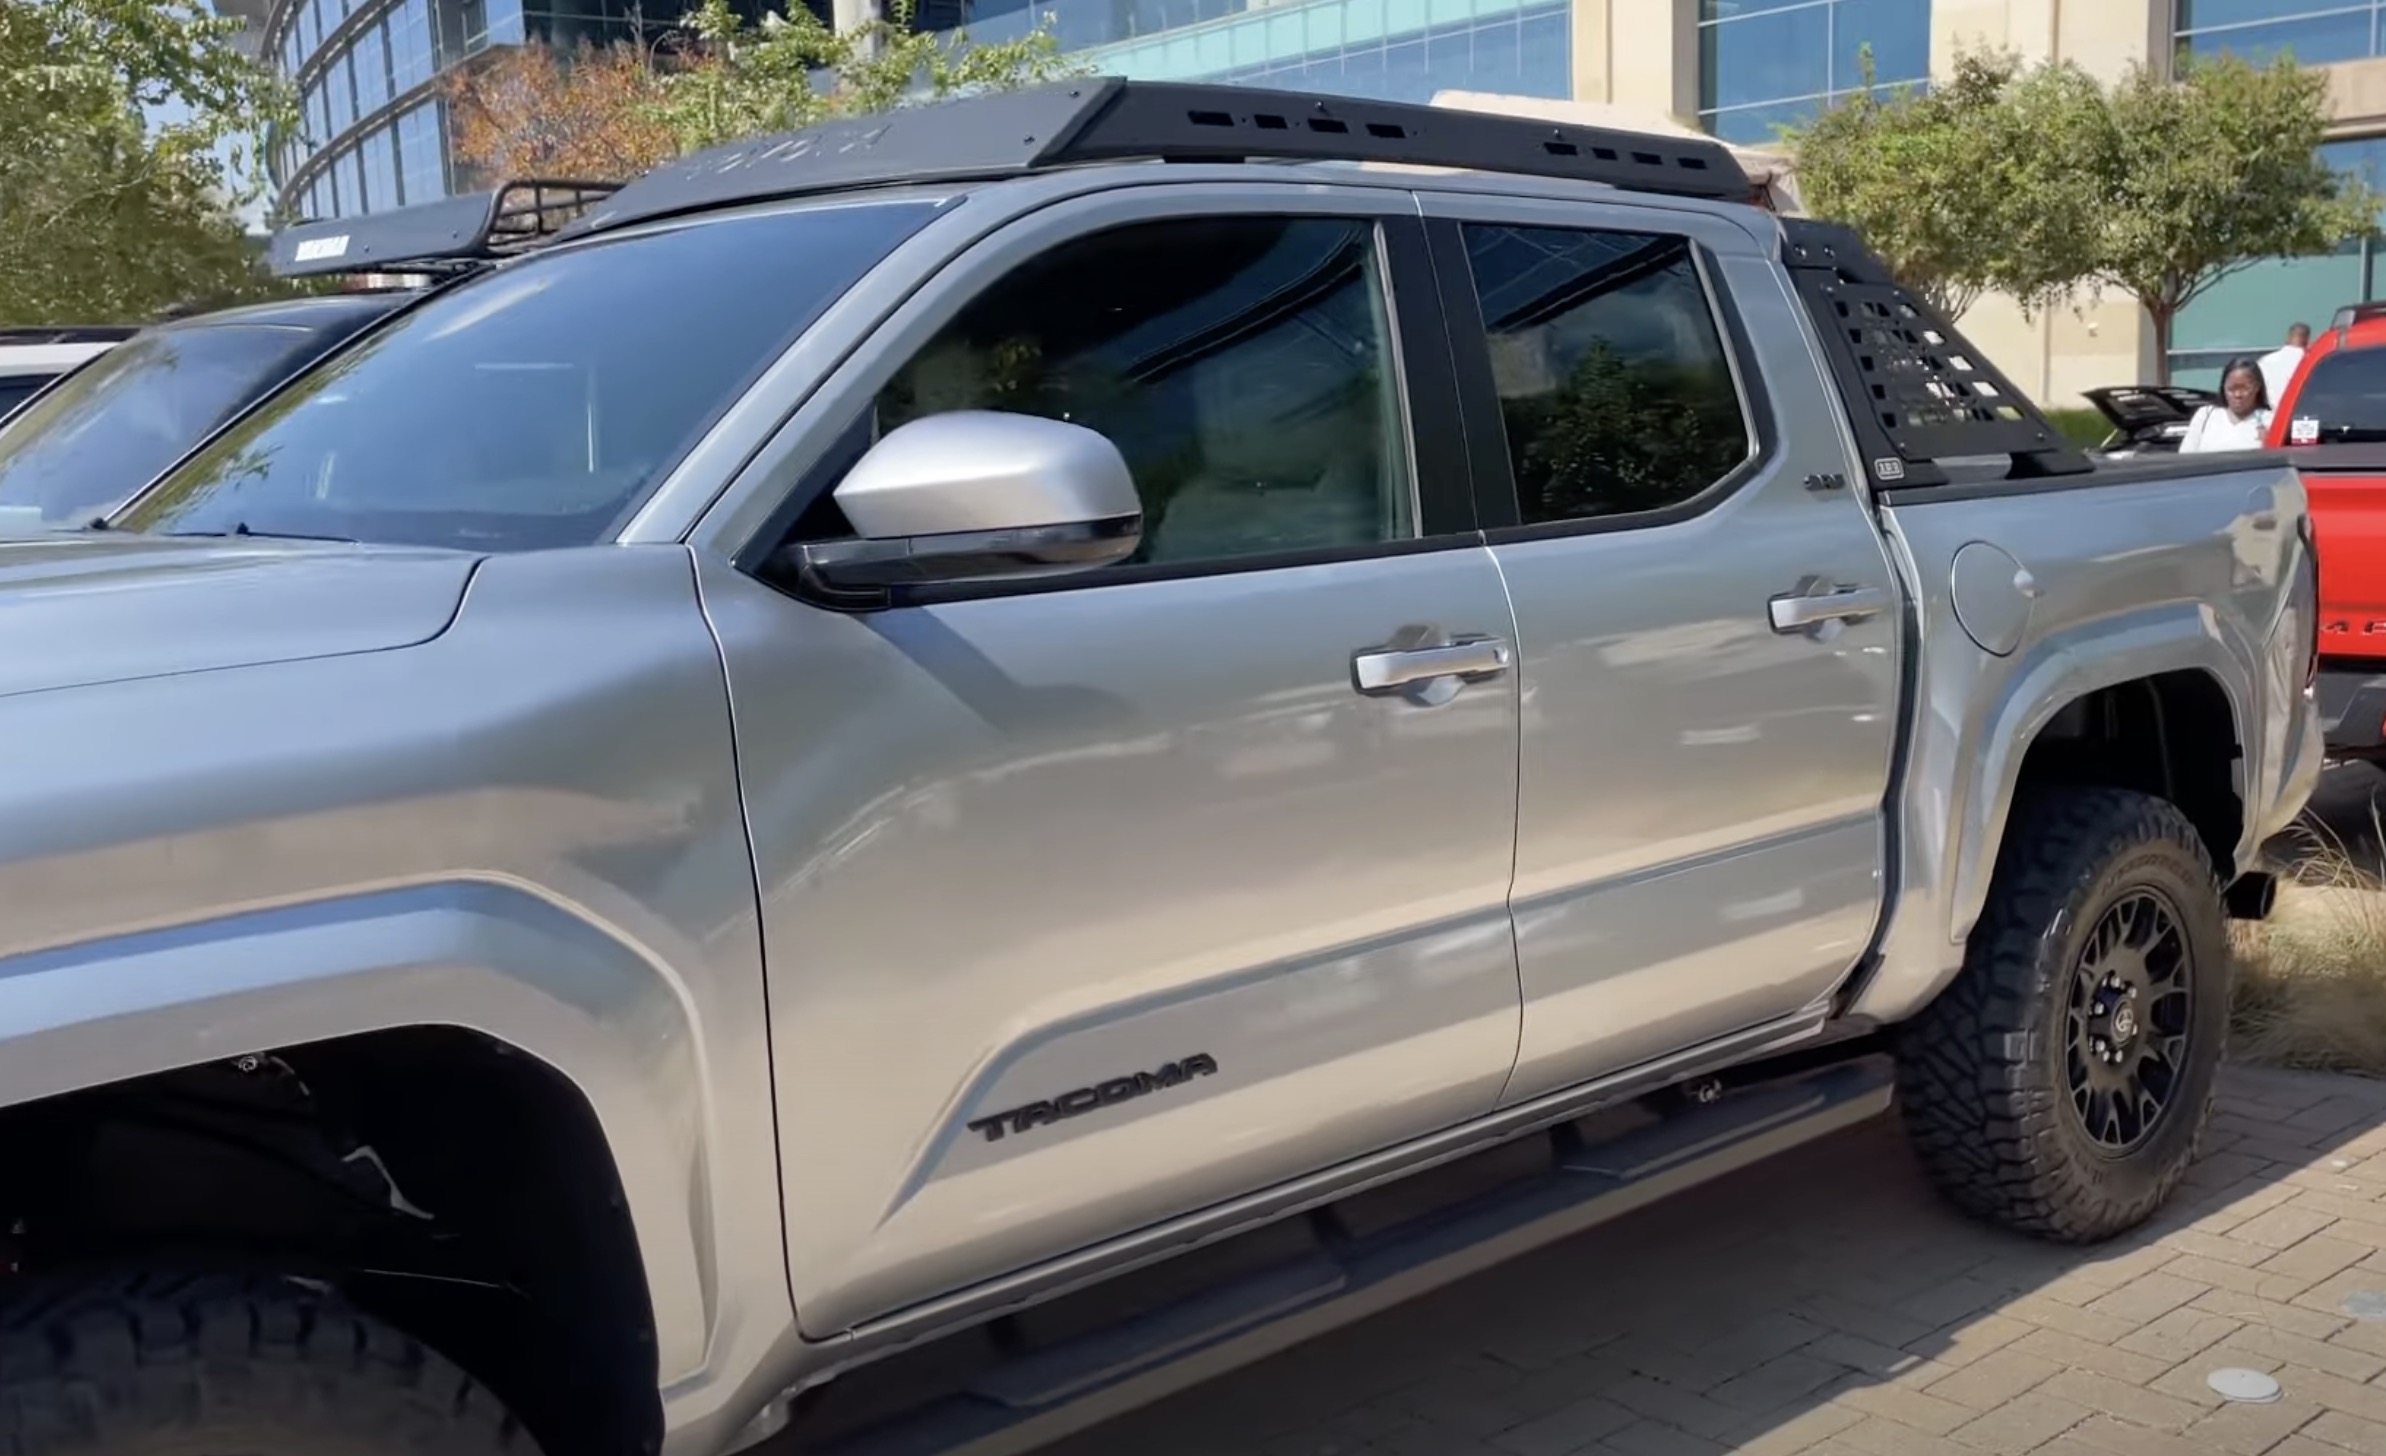 2024 Tacoma Lifted 2024 Tacoma Build (SR5) w/ Toyota Accessories (TRD Lift Kit 2.5" Front / 2" Rear, Wheels, Exhaust, Bed Tire Carrier, Skid Plate, Etc)! Celestial Silver 2024 Tacom SR5 TRD Lift Kit 2.5 2.0 inches springs struts build 4